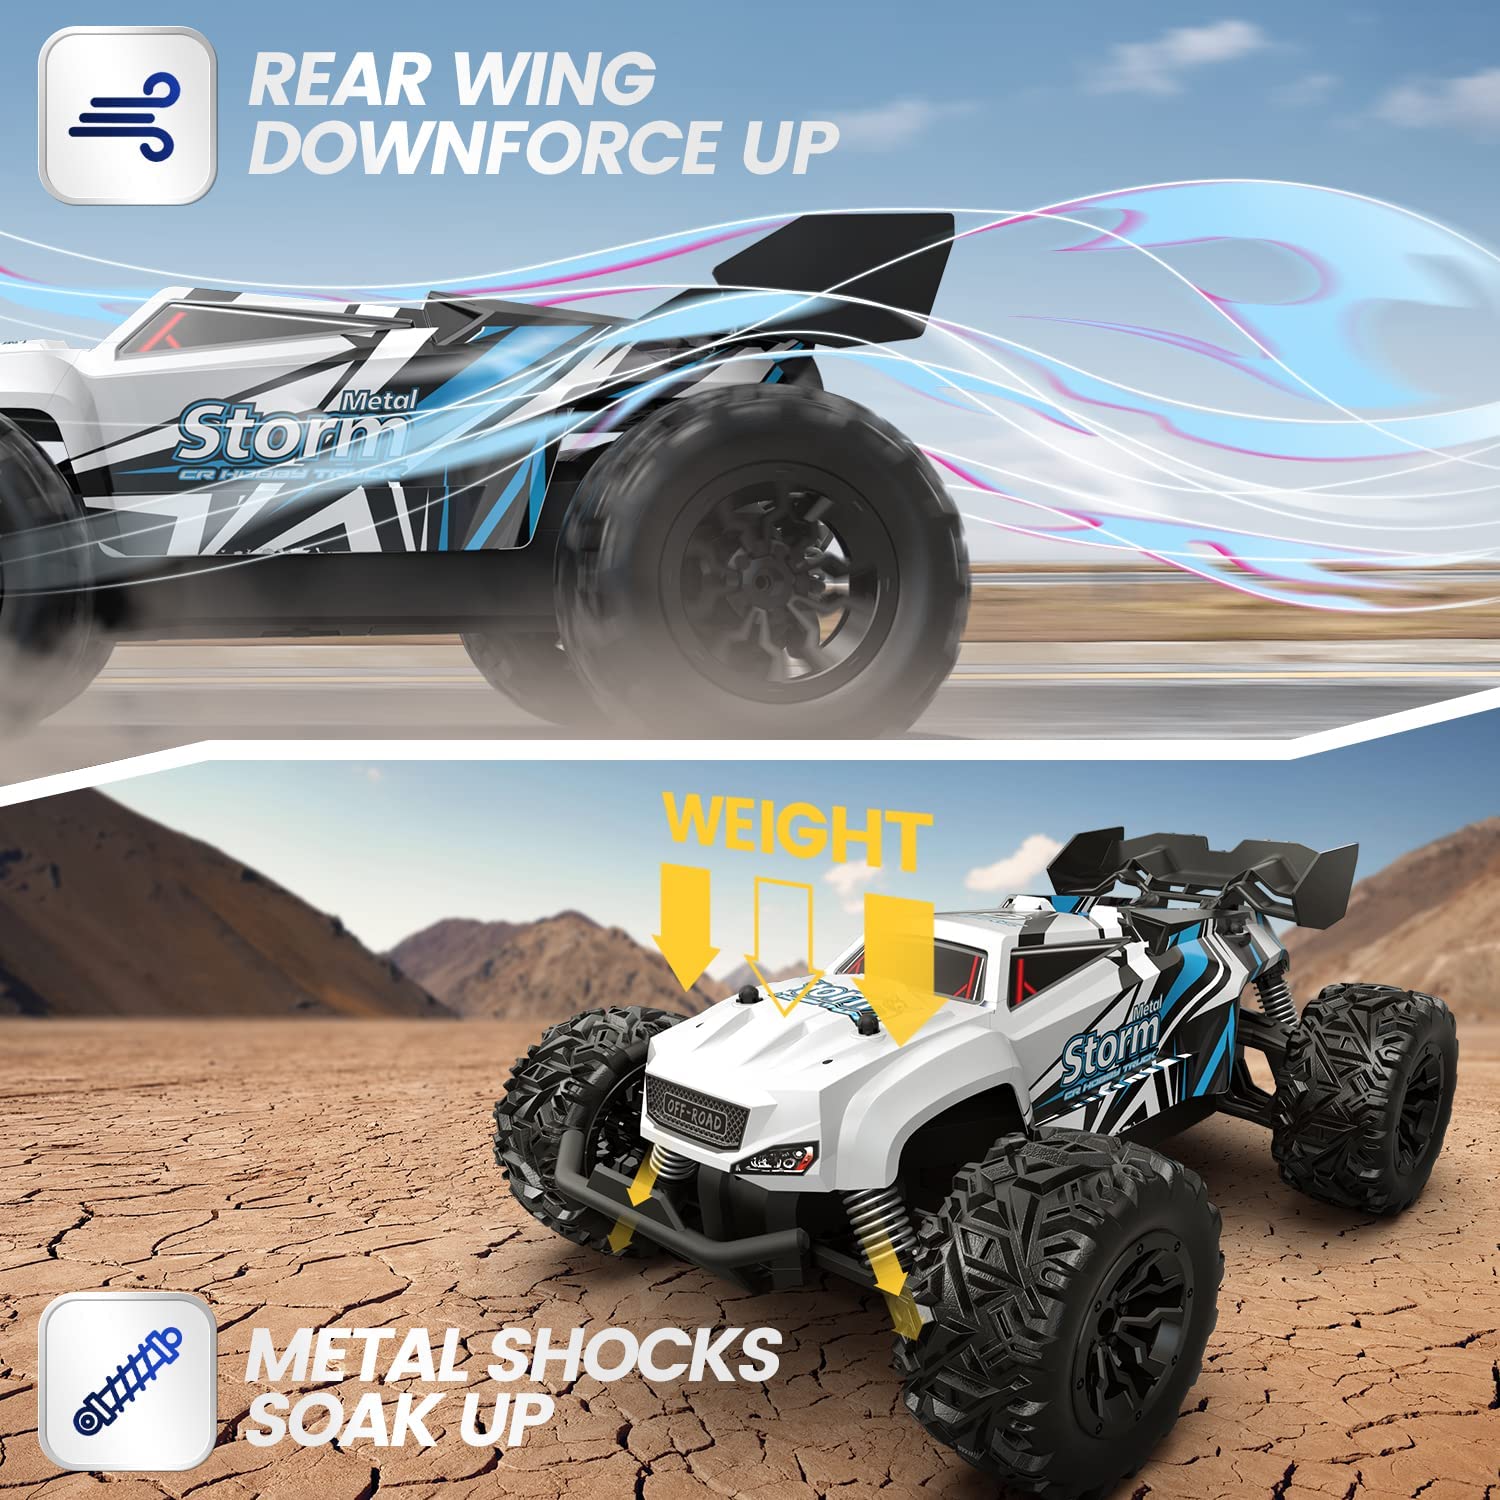 DEERC RC Car, Remote Control Monster Truck W/ 2 Batteries for 40 Min Play, All-Terrain 2.4GHz RTR Rock Crawler Toy Gift for Boys Girls Kids Beginners